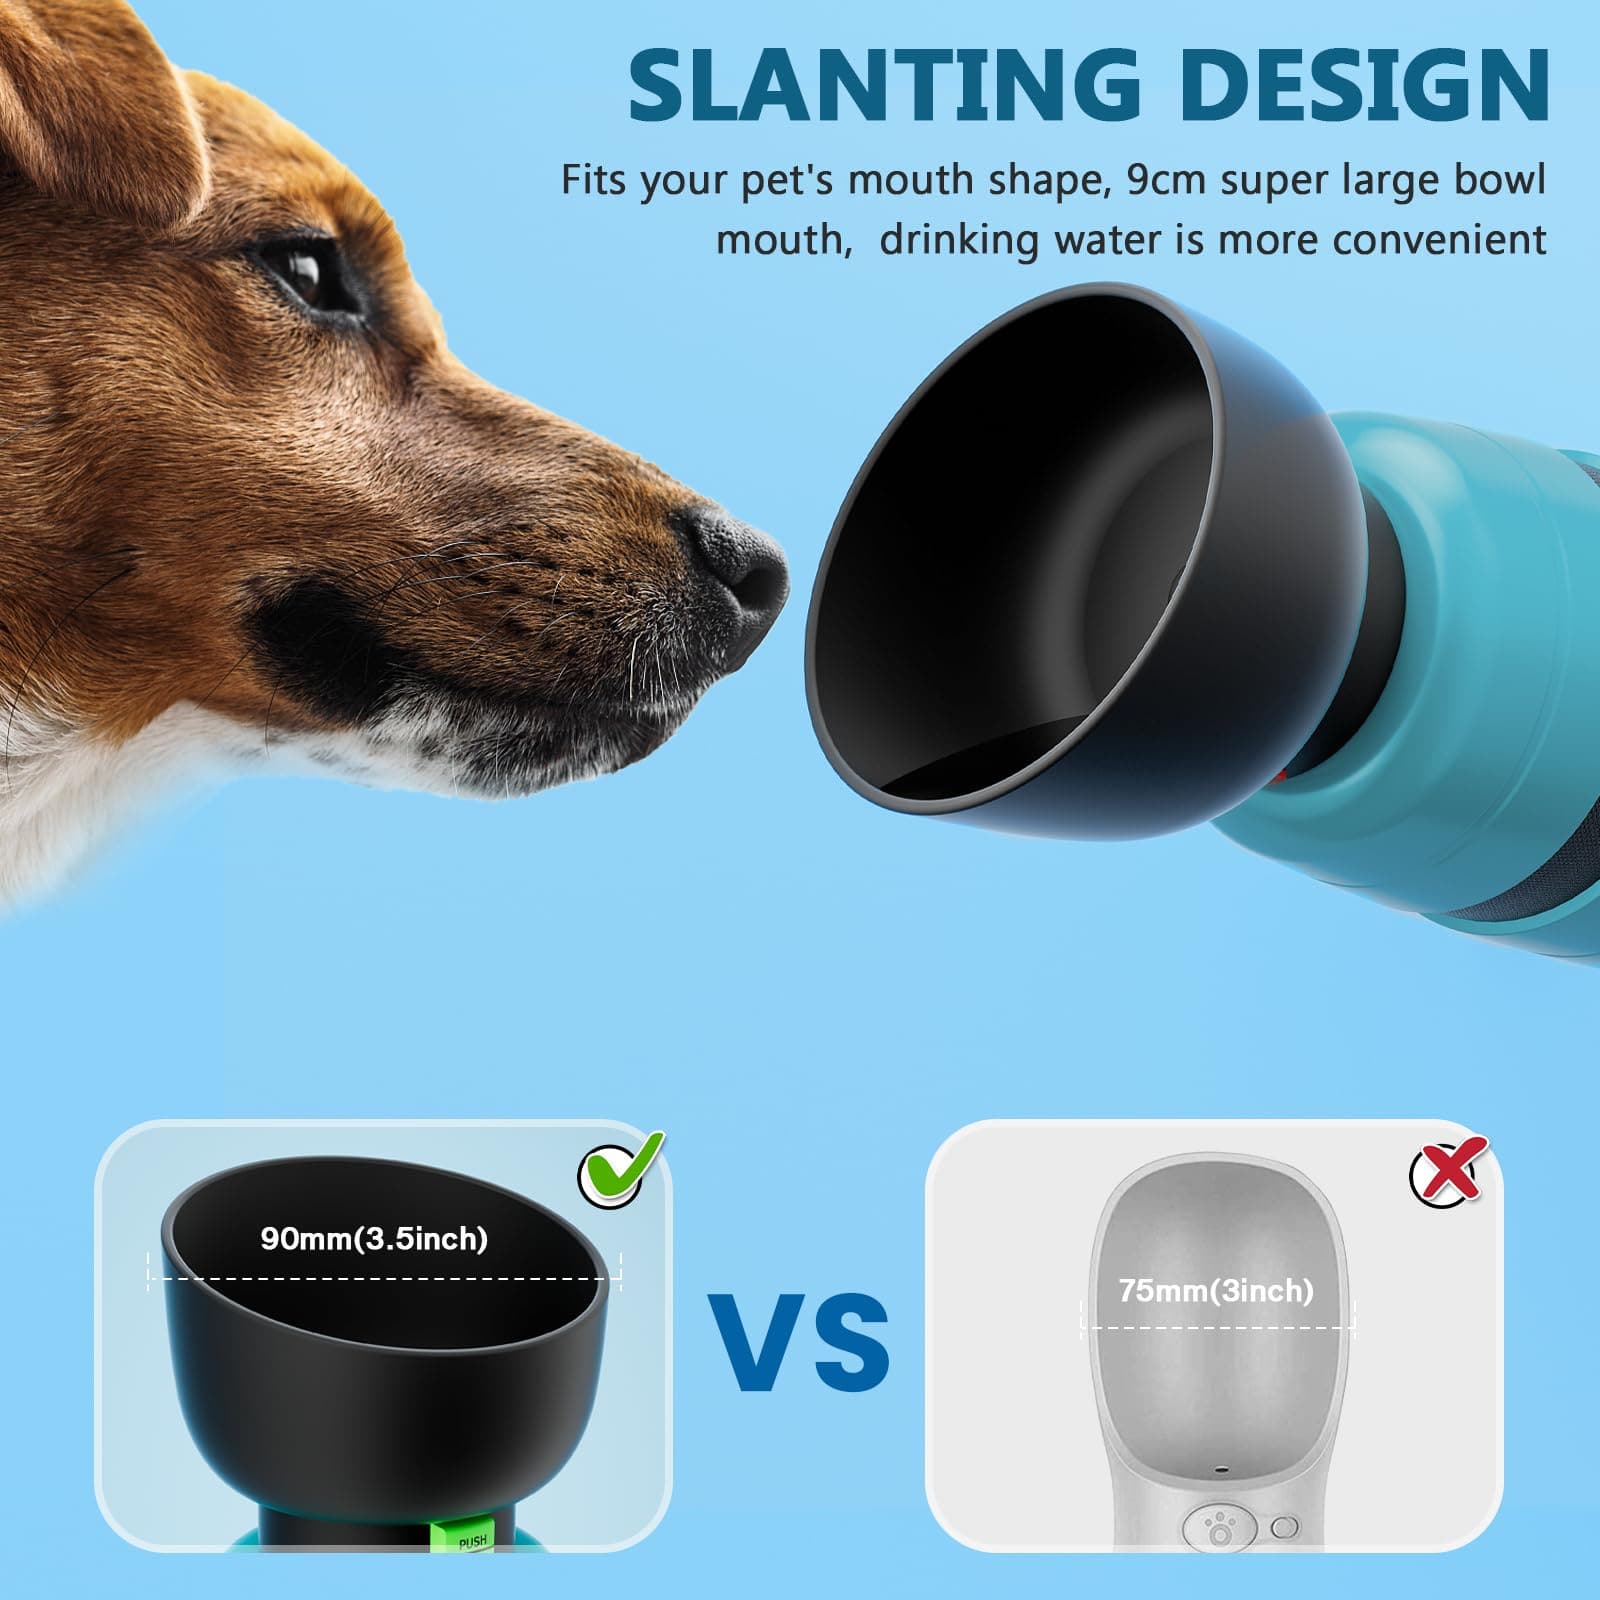 Pecute Blue Portable Dog Water Bottle with Food Container (650ml+150ml)